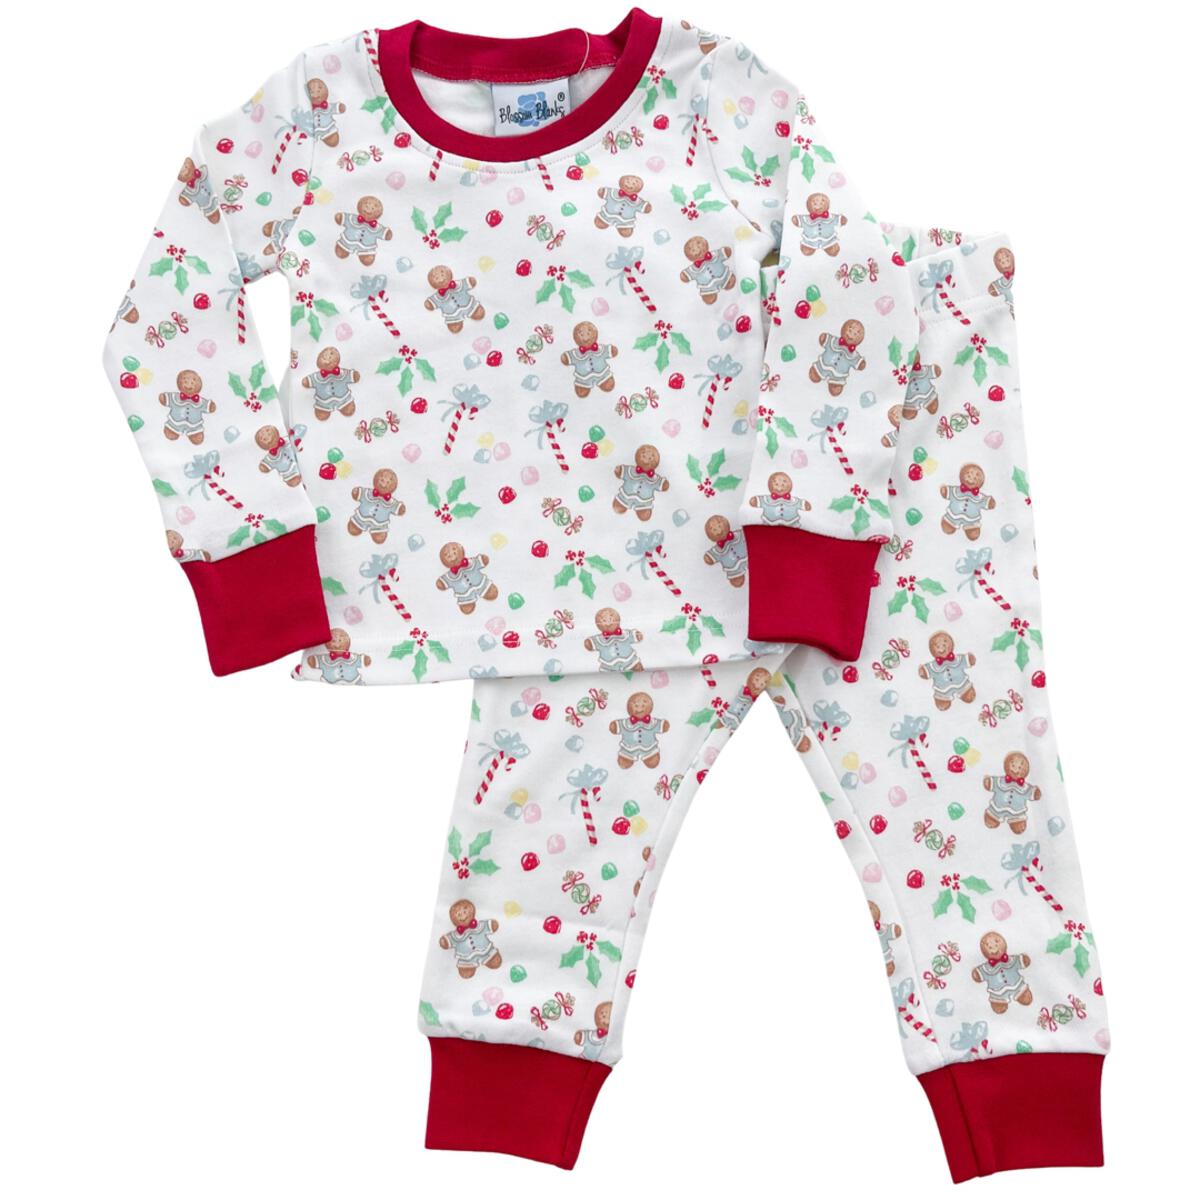 A baby's Boy Gingerbread Pajama Pant Set with a red and white pattern by Chickie Collective.